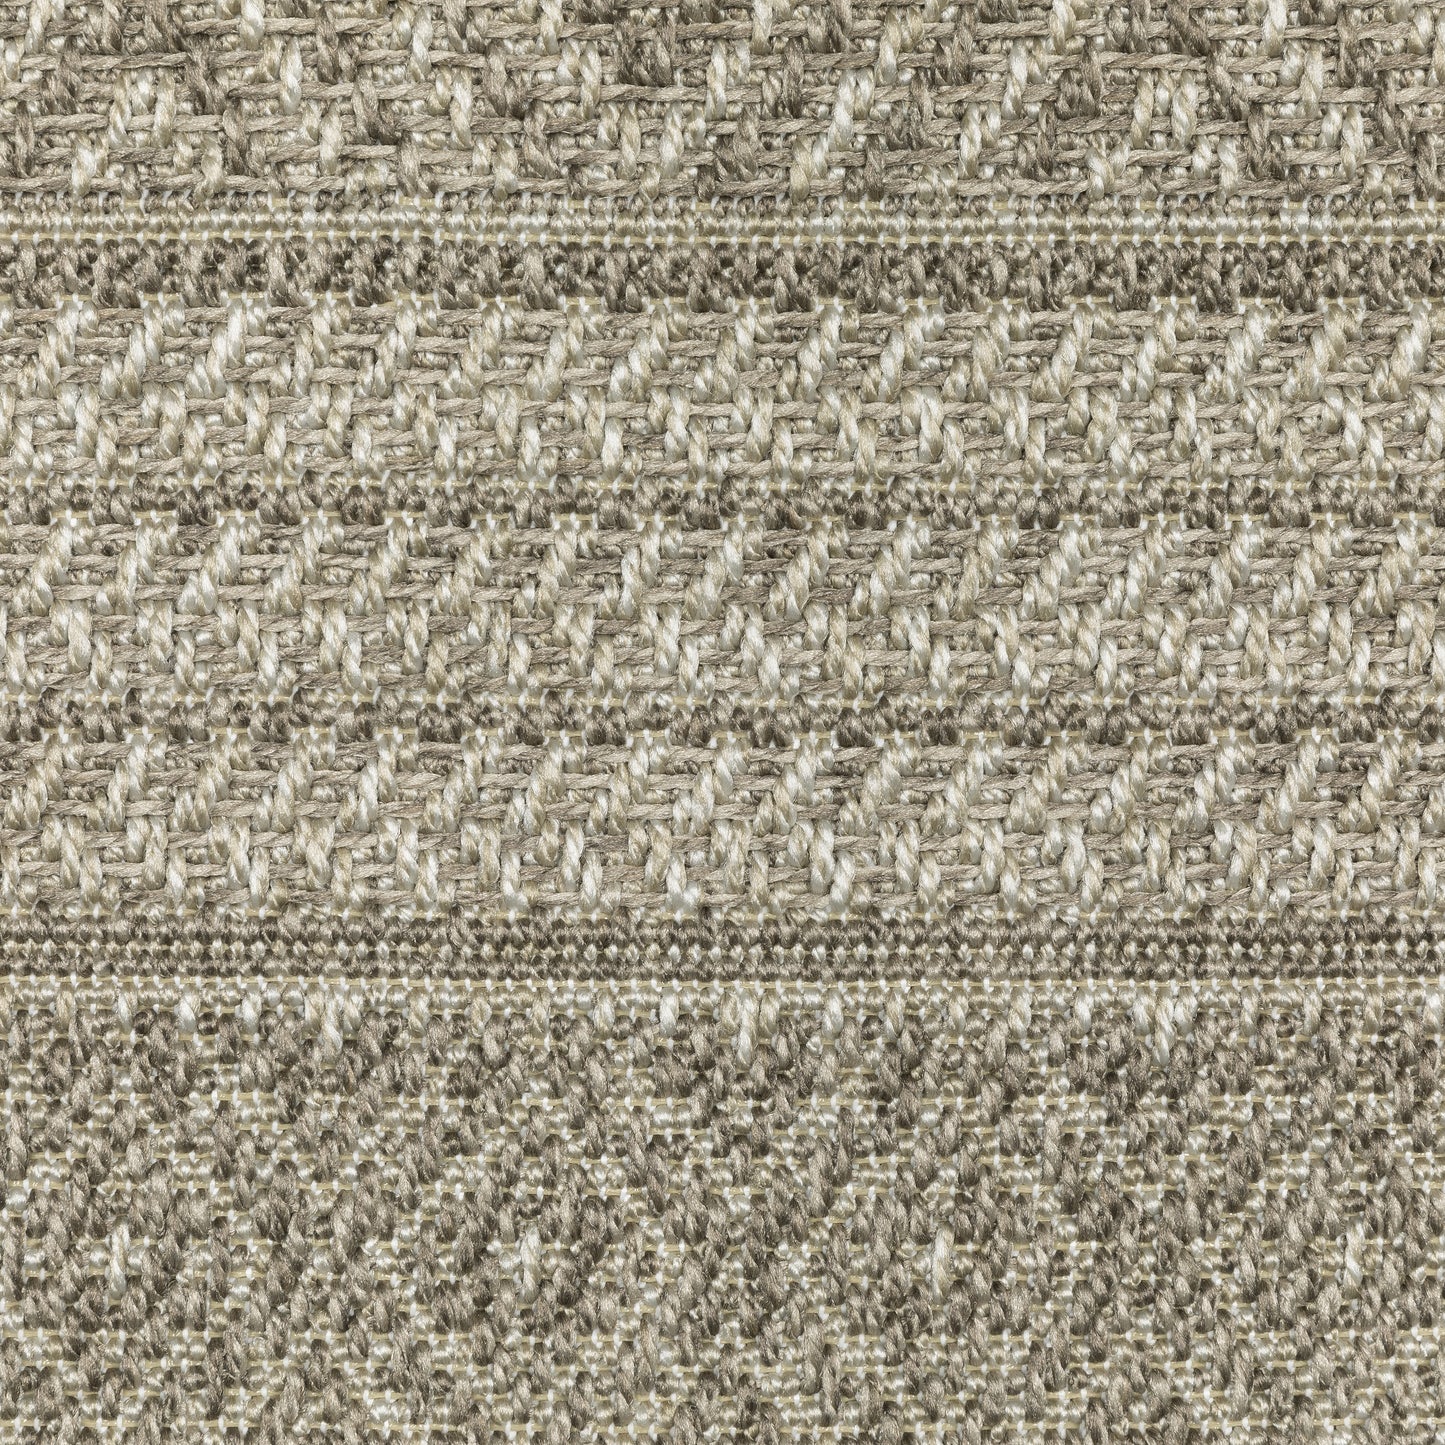 CAICOS Stripe Power-Loomed Synthetic Blend Indoor Area Rug by Oriental Weavers